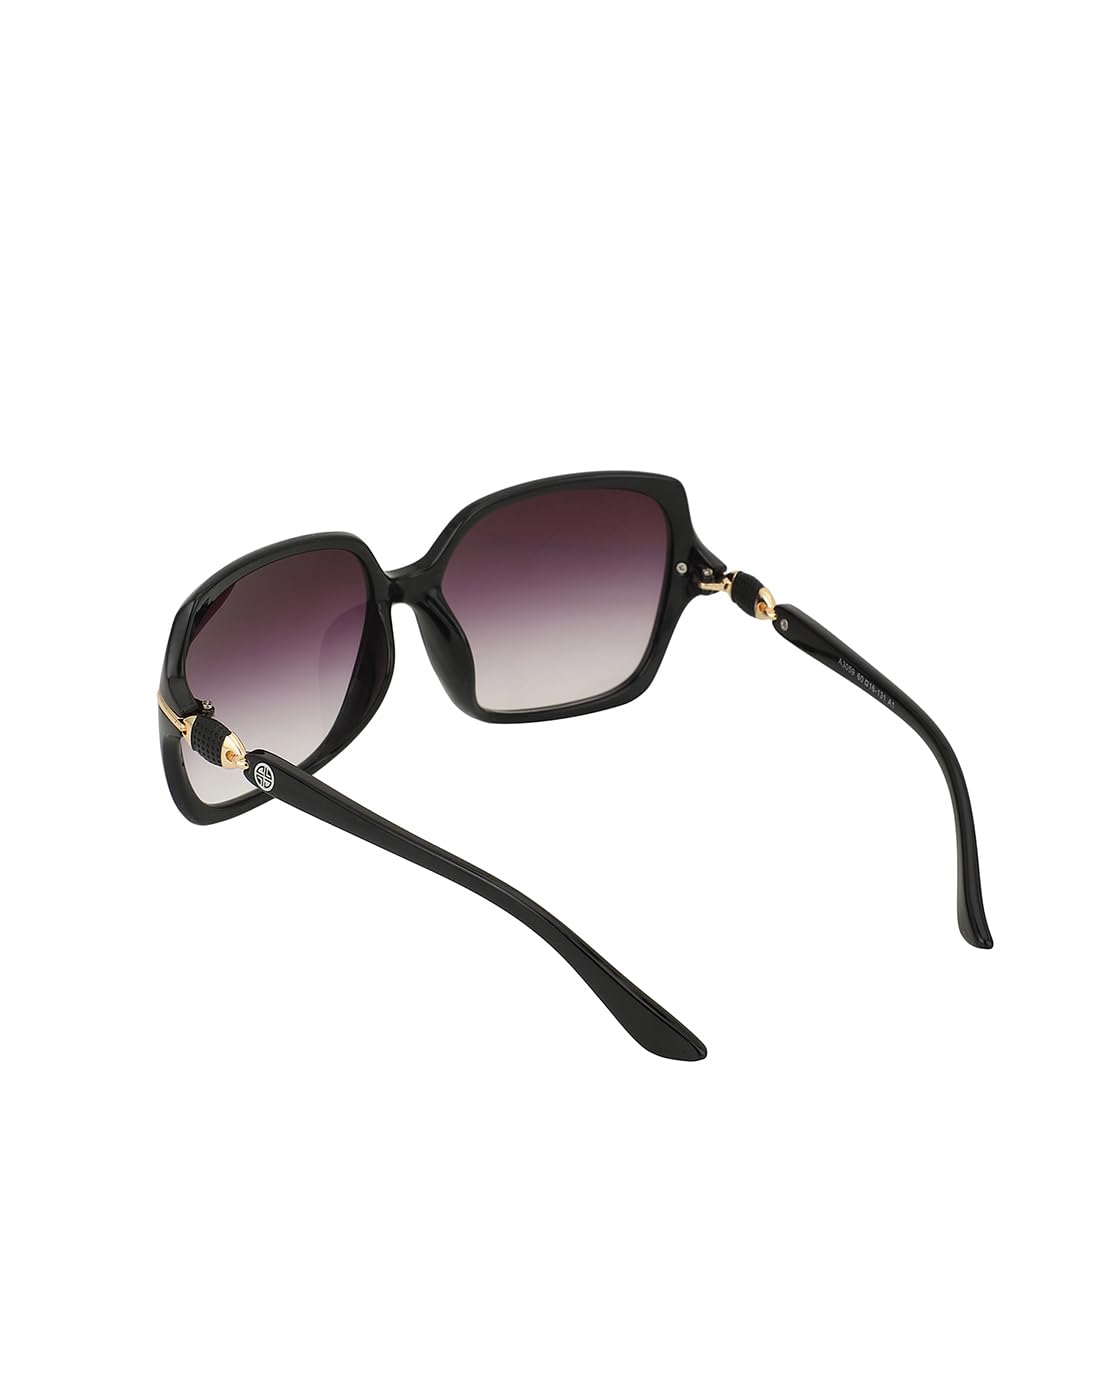 Carlton London Black with Gold toned Oversized Women Sunglass with UV Protected Lens